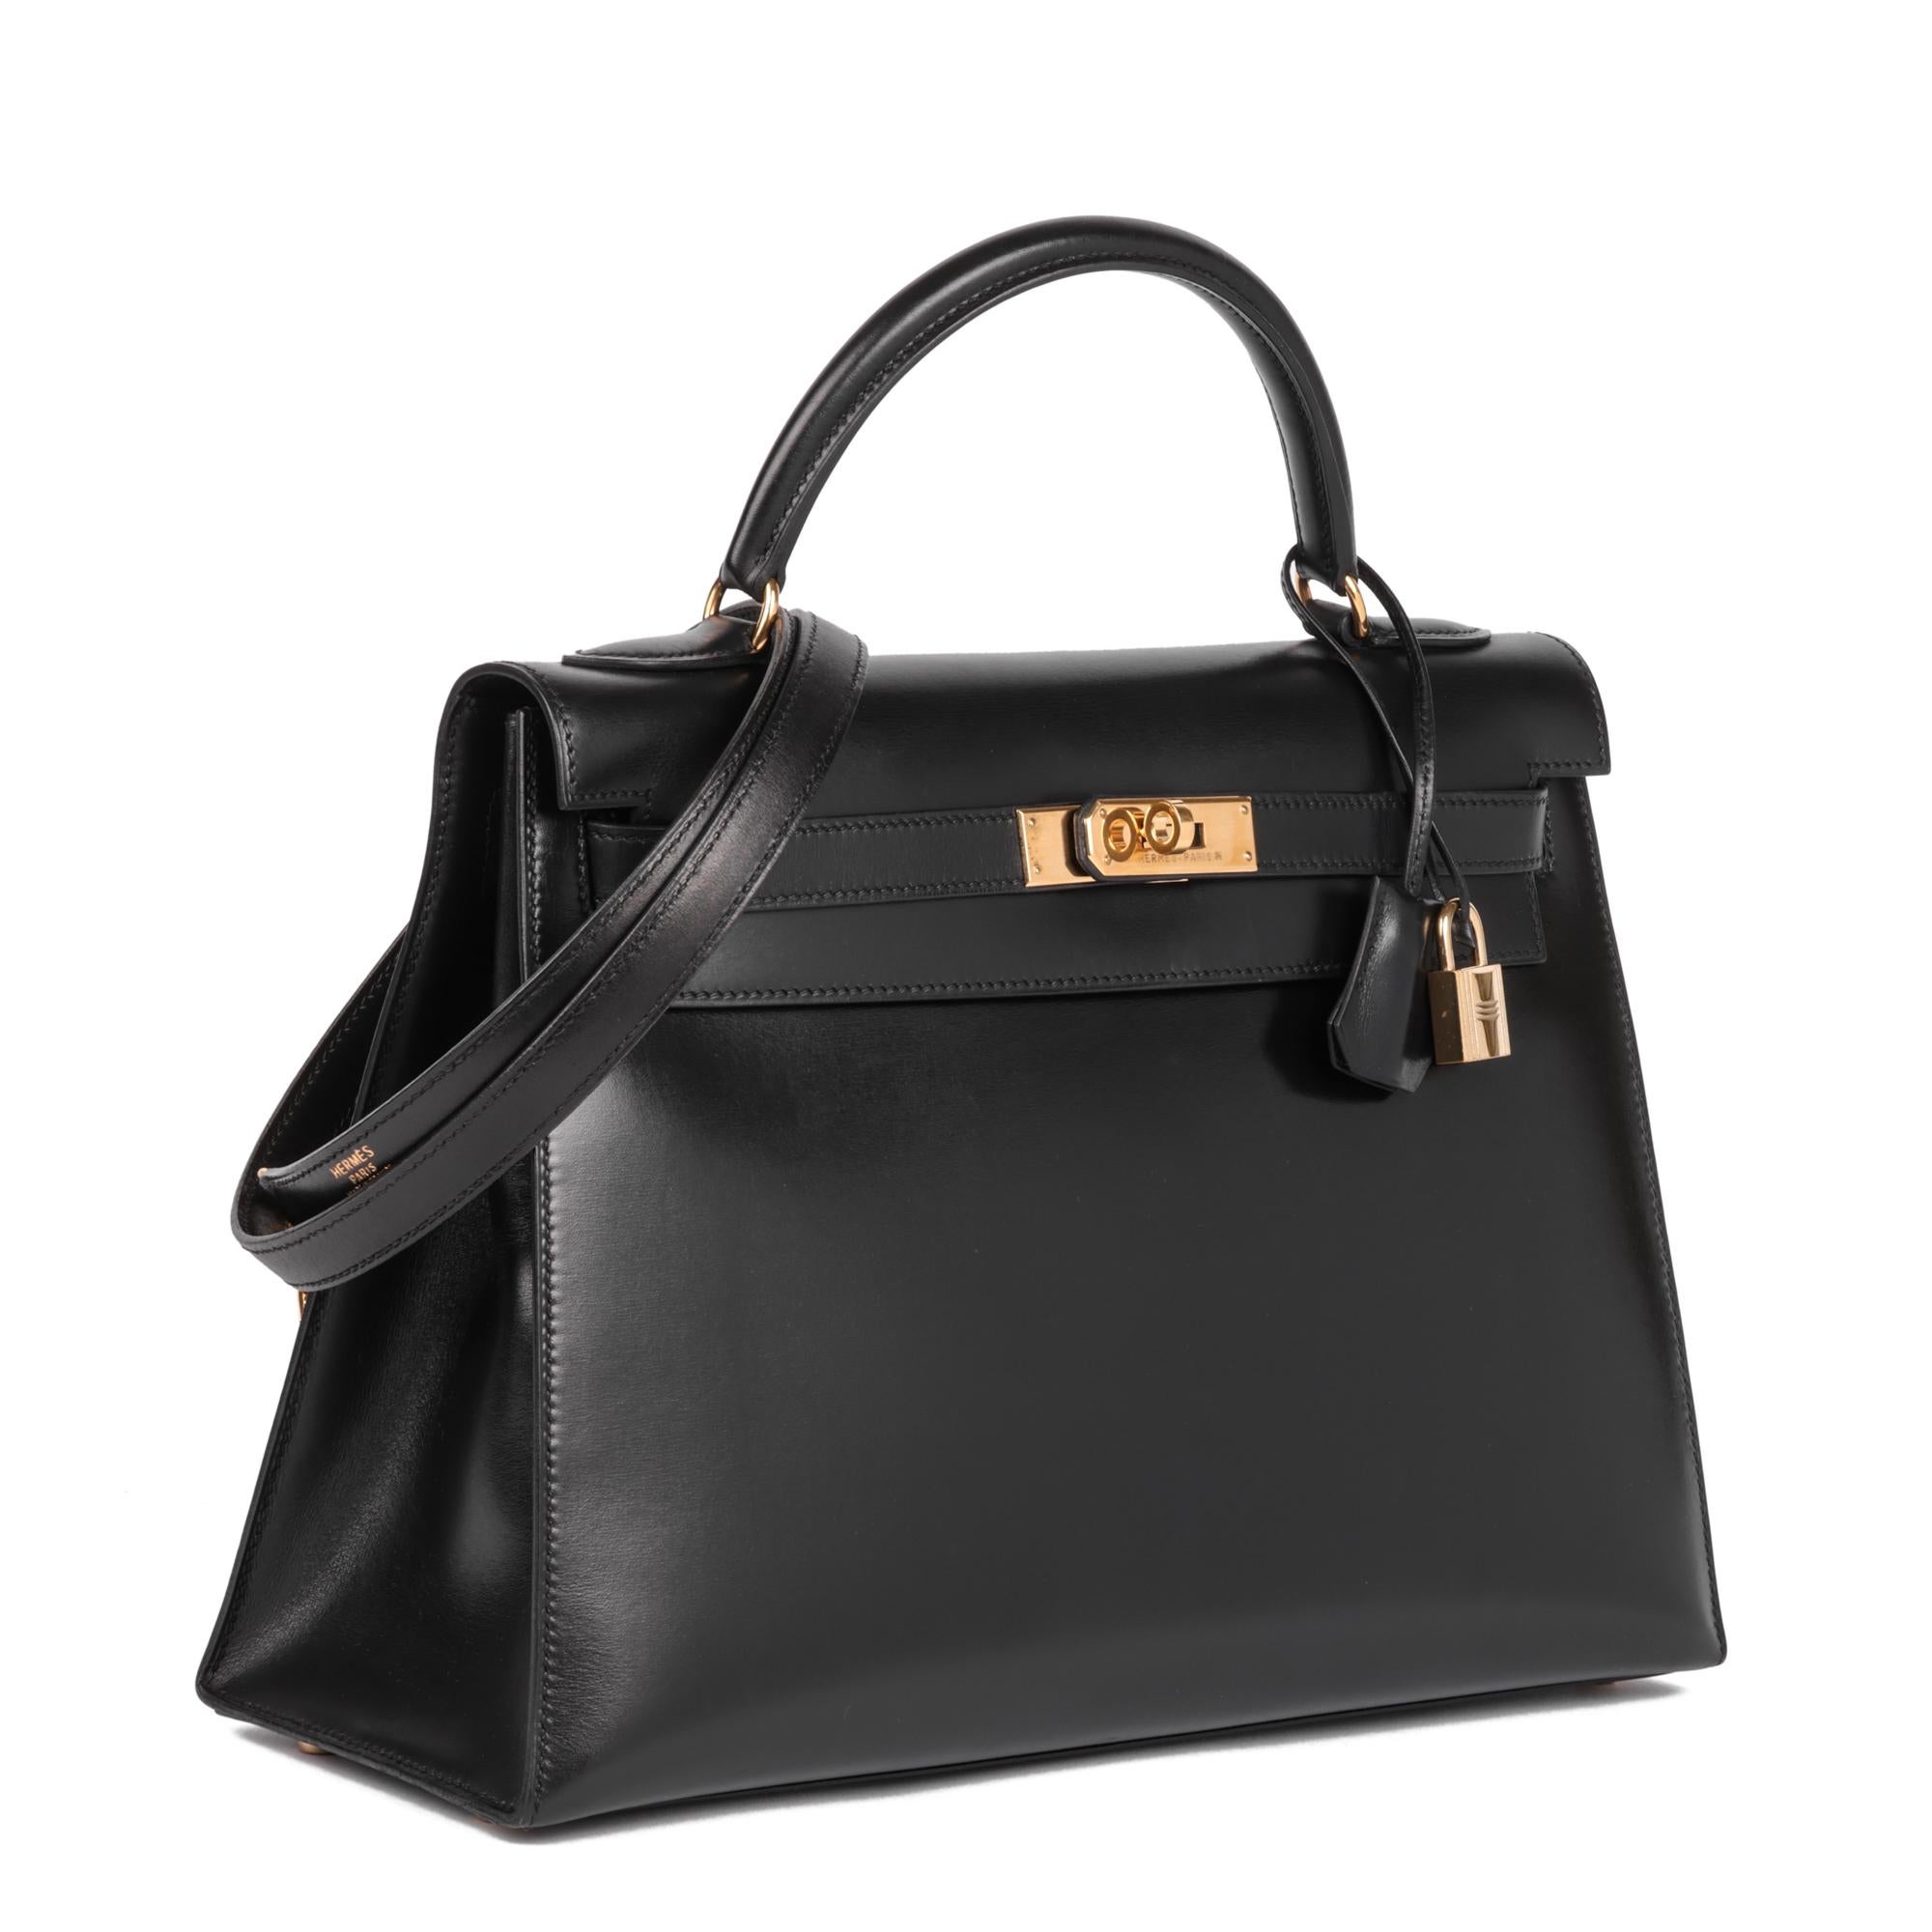 
Hermès Black Box Calf Leather Vintage Kelly 32cm

CONDITION NOTES
The exterior is in very good condition with moderate signs of use. There are light scratch marks at the front of the bag.
The interior is in excellent condition with light signs of